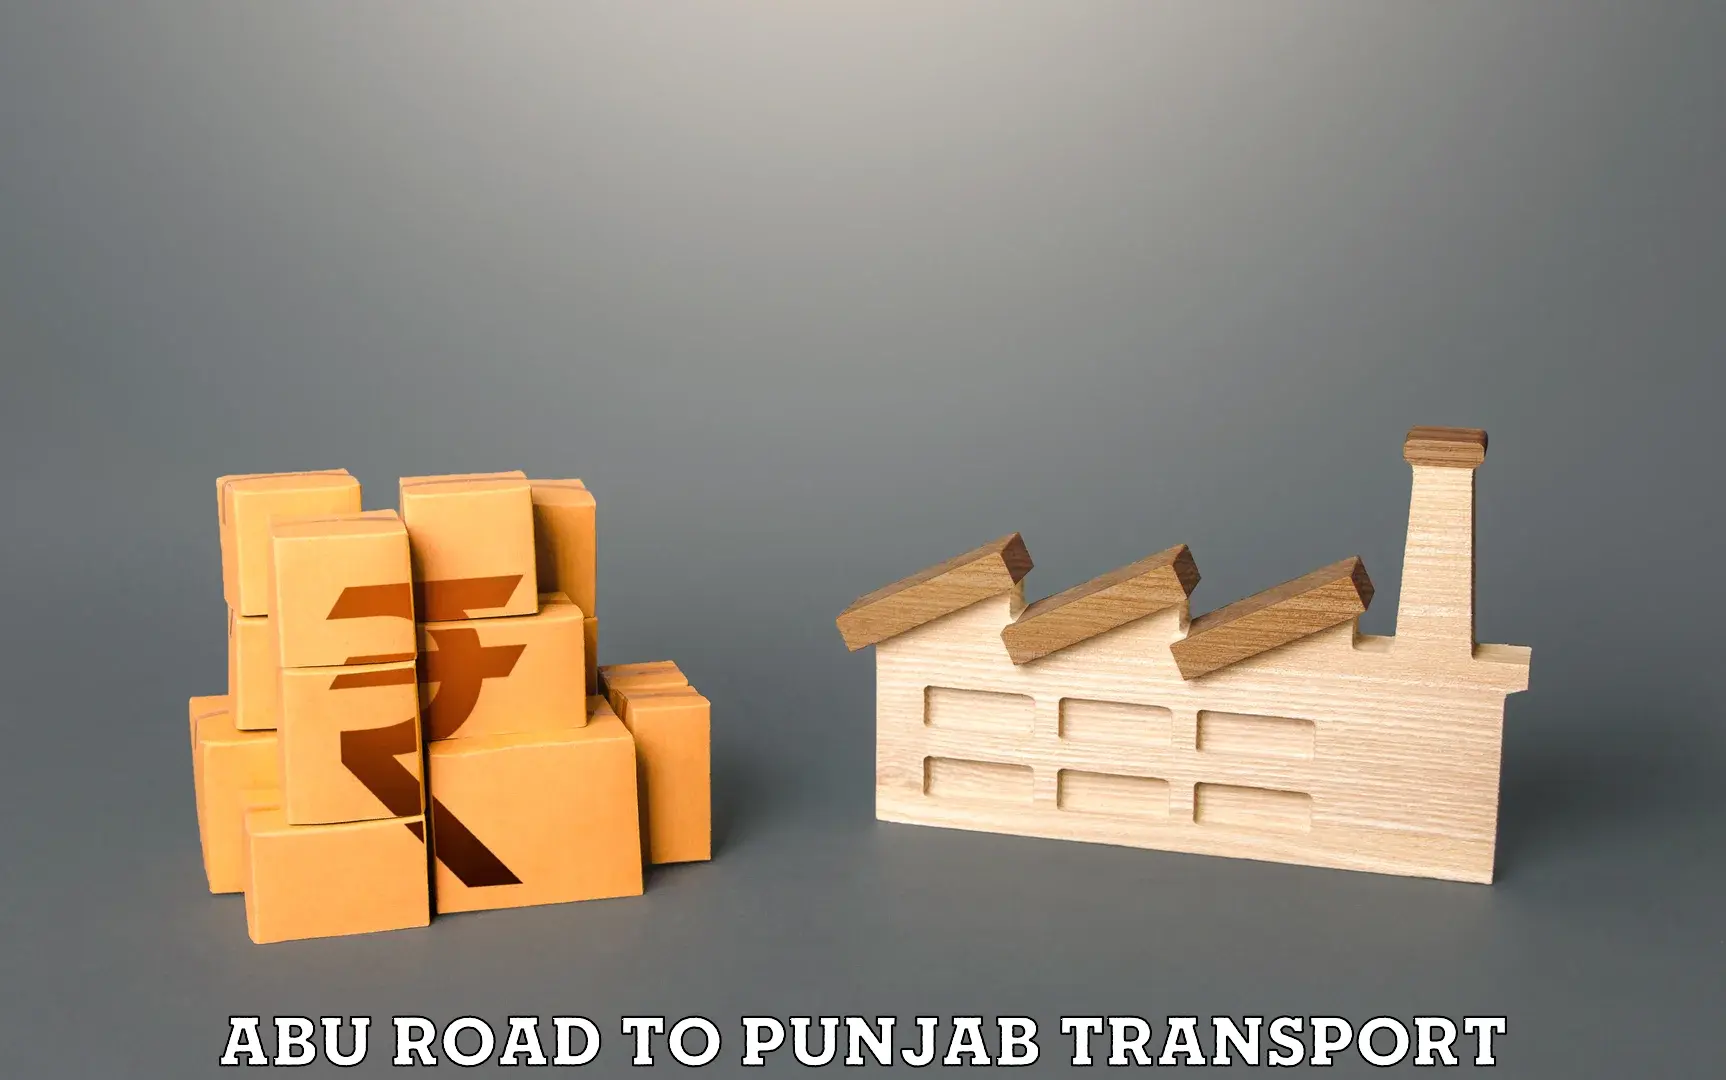 Transport bike from one state to another in Abu Road to Punjab